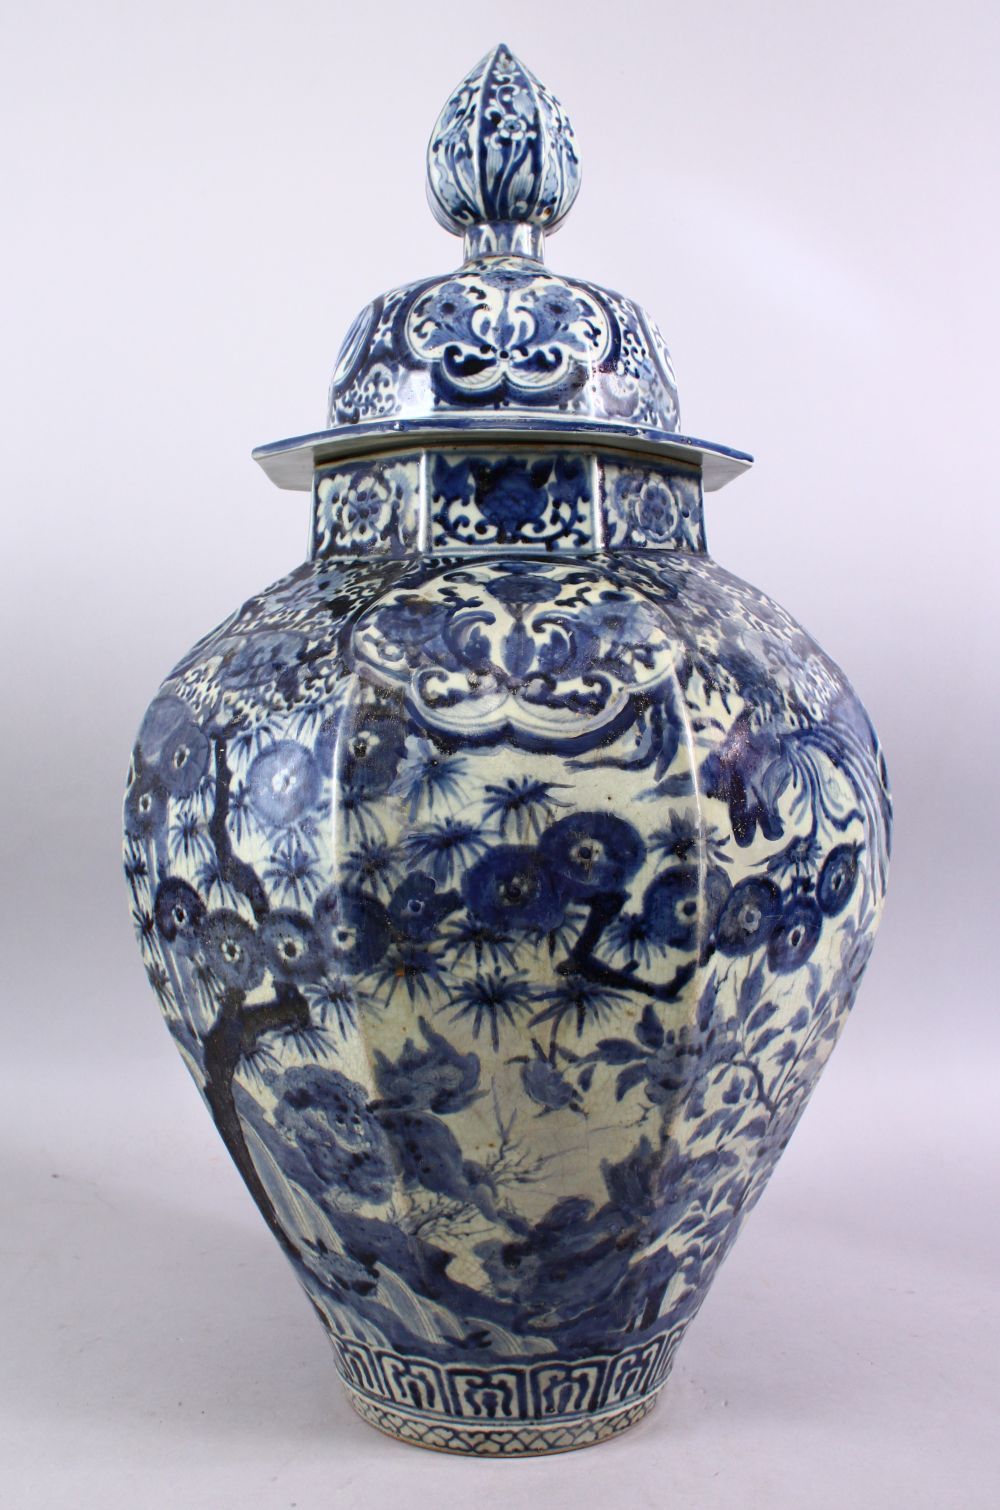 A LARGE EARLY 16TH / 17TH CENTURY JAPANESE BLUE & WHITIE IMARI PORCELAIN VASE & COVER, The octagonal